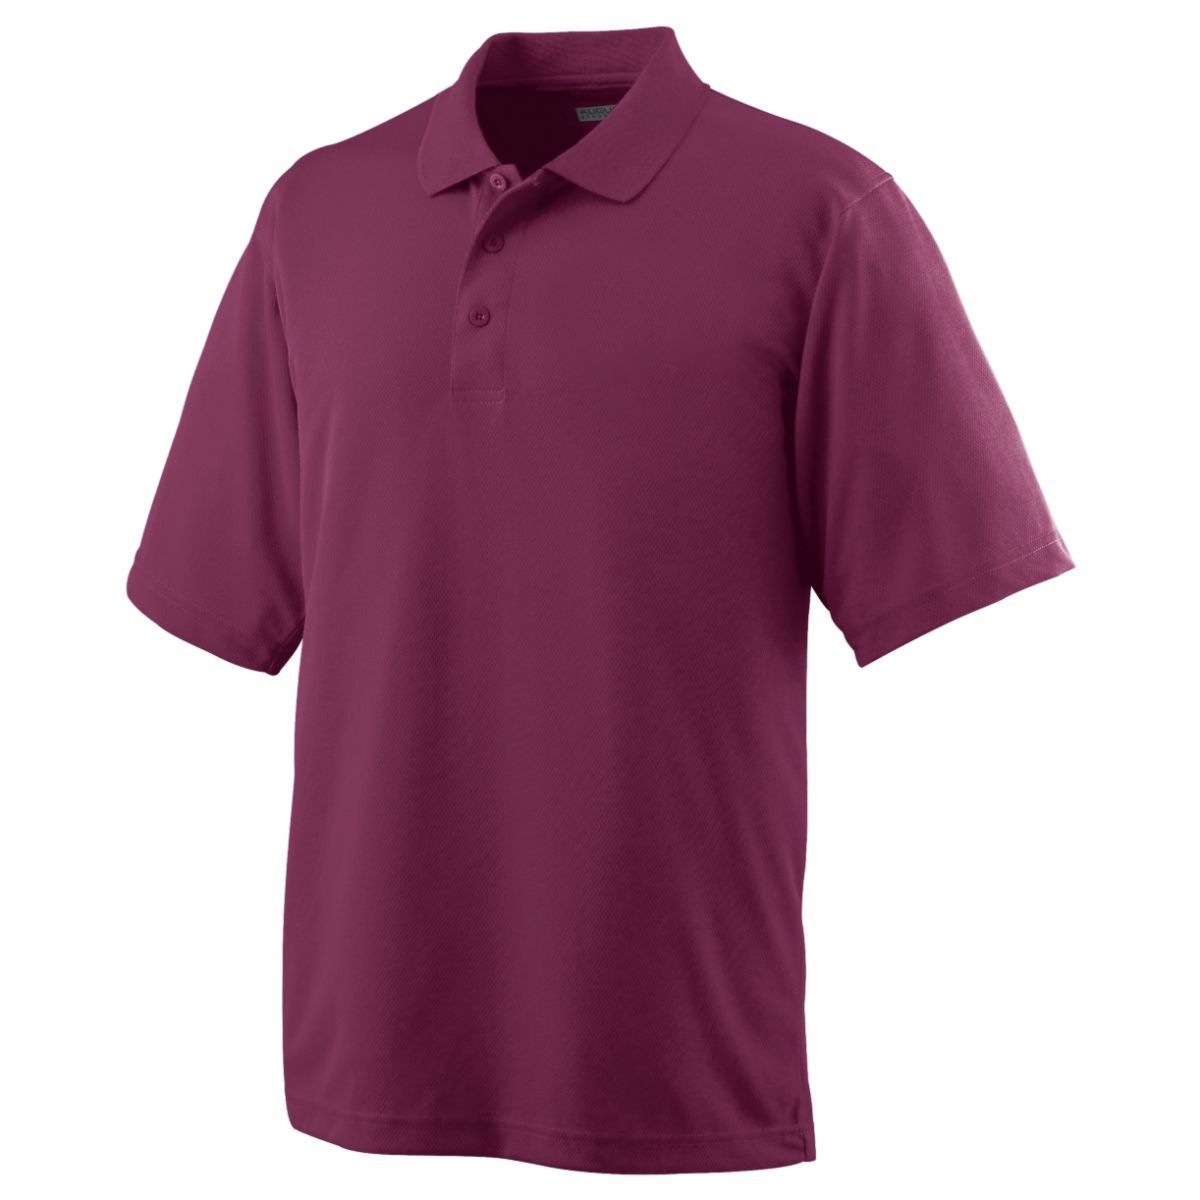 Augusta Sportswear Wicking Mesh Polo in Maroon  -Part of the Adult, Adult-Polos, Polos, Augusta-Products, Tennis, Shirts product lines at KanaleyCreations.com